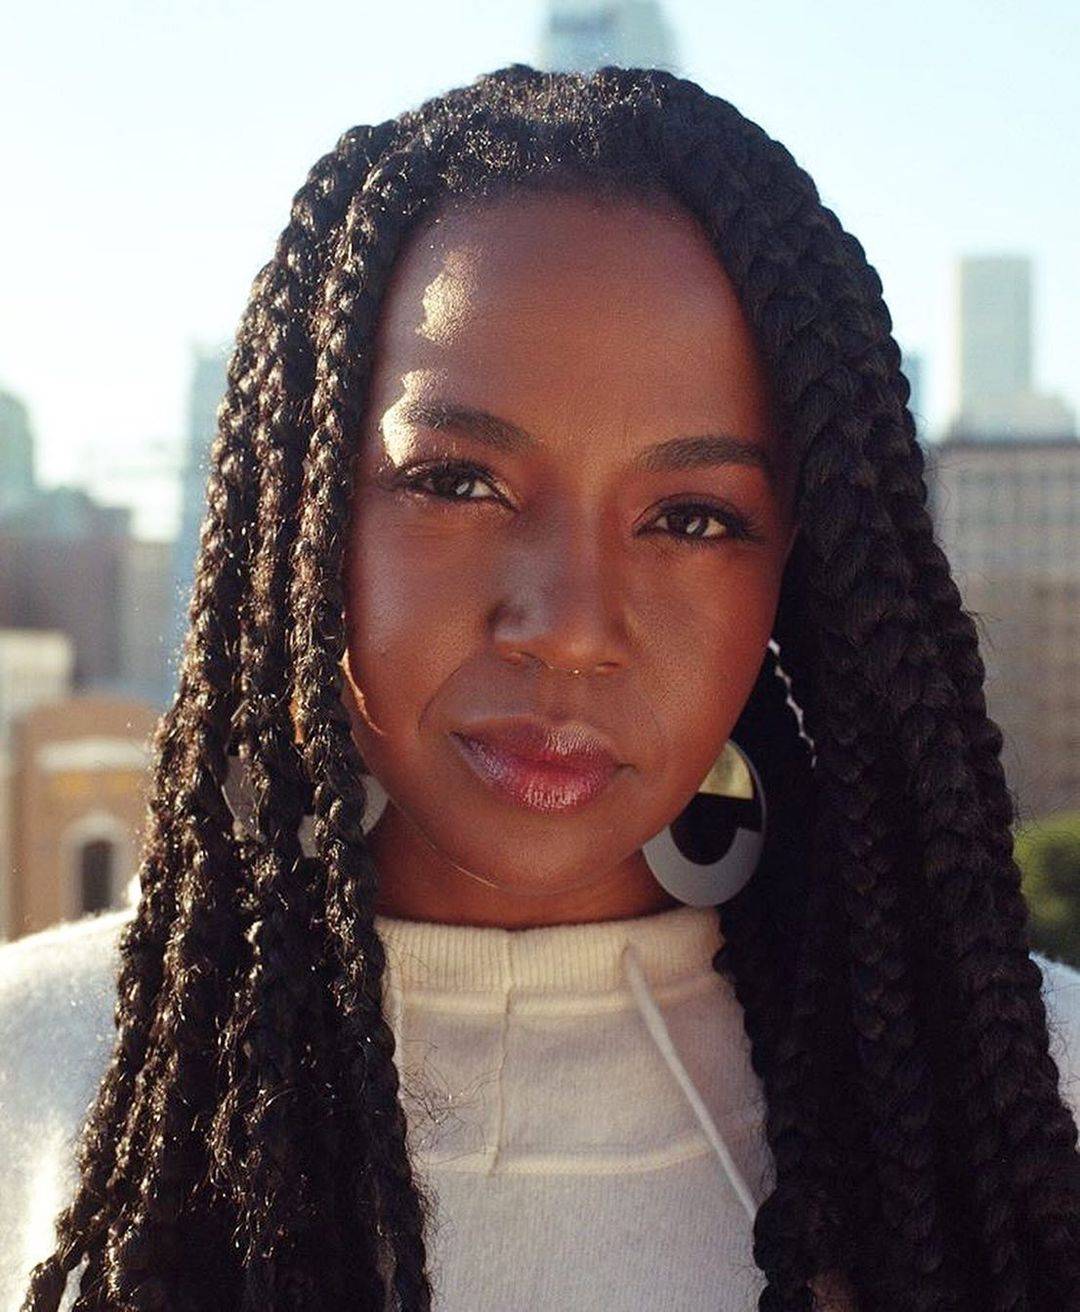 Jerrika Hinton is looking beautiful with braids and here she is posing for a picture.